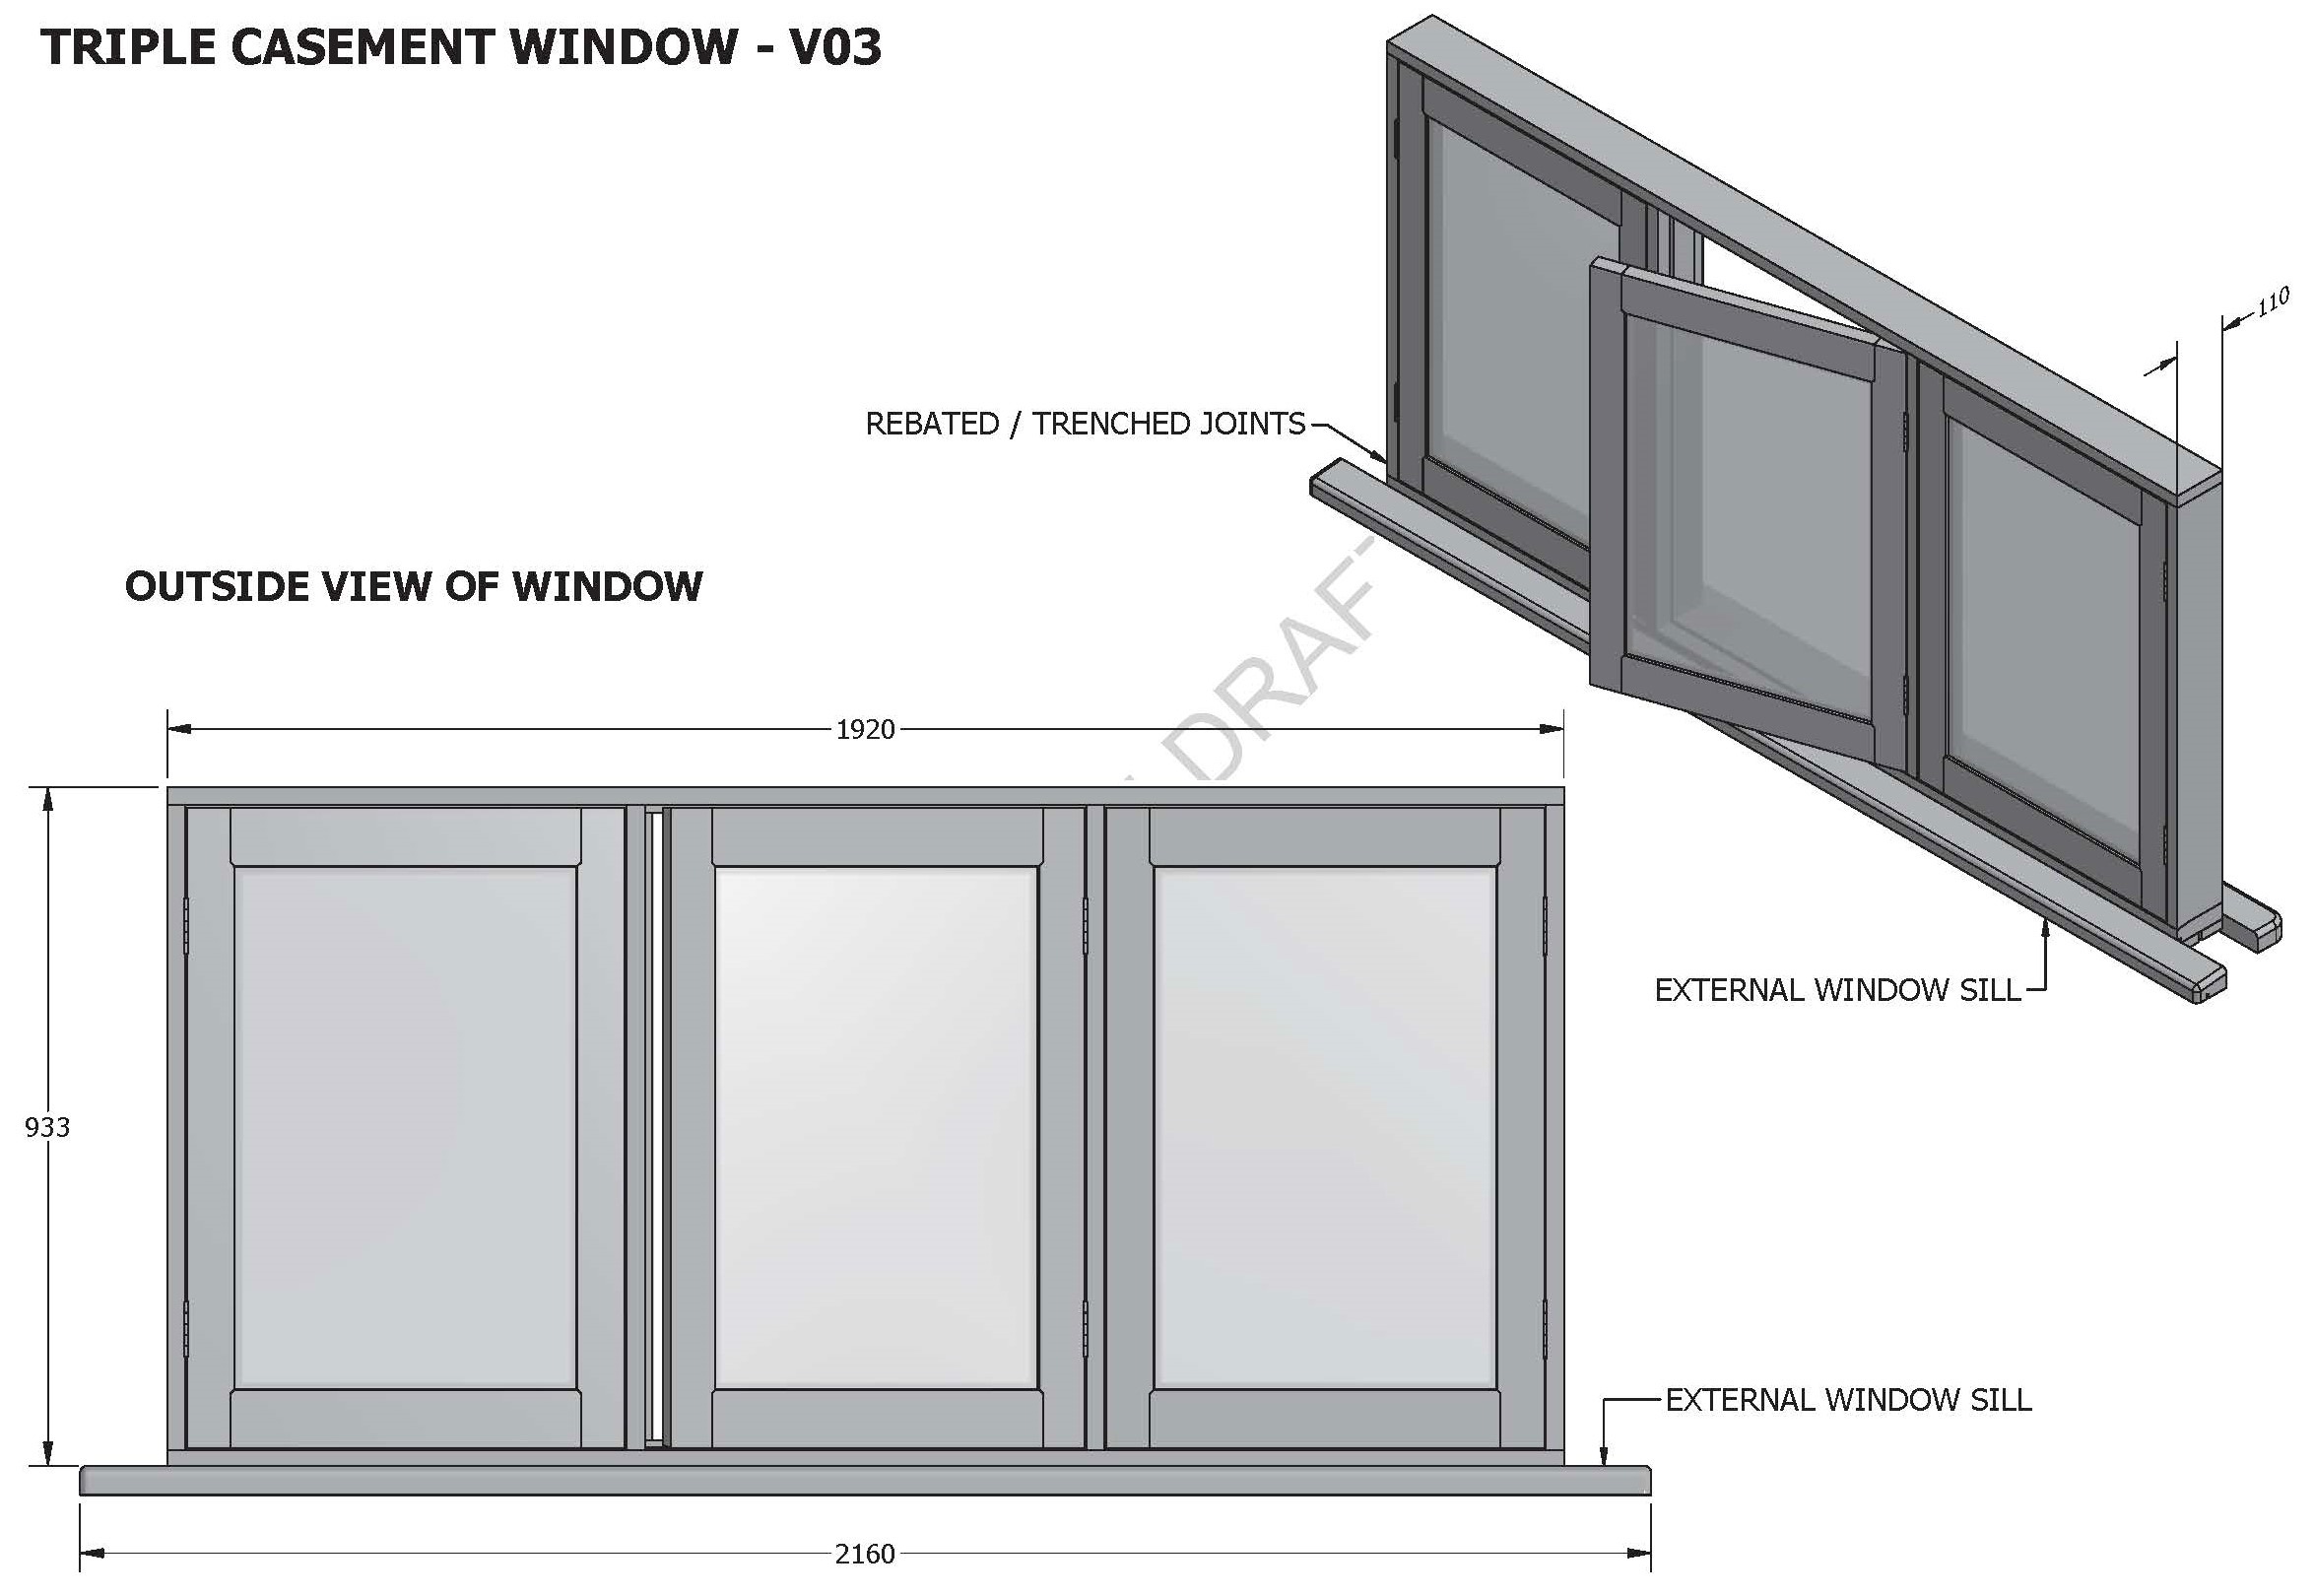 TRIPLE CASEMENT WINDOWS V01 - Build your own and SAVE BIG $$$